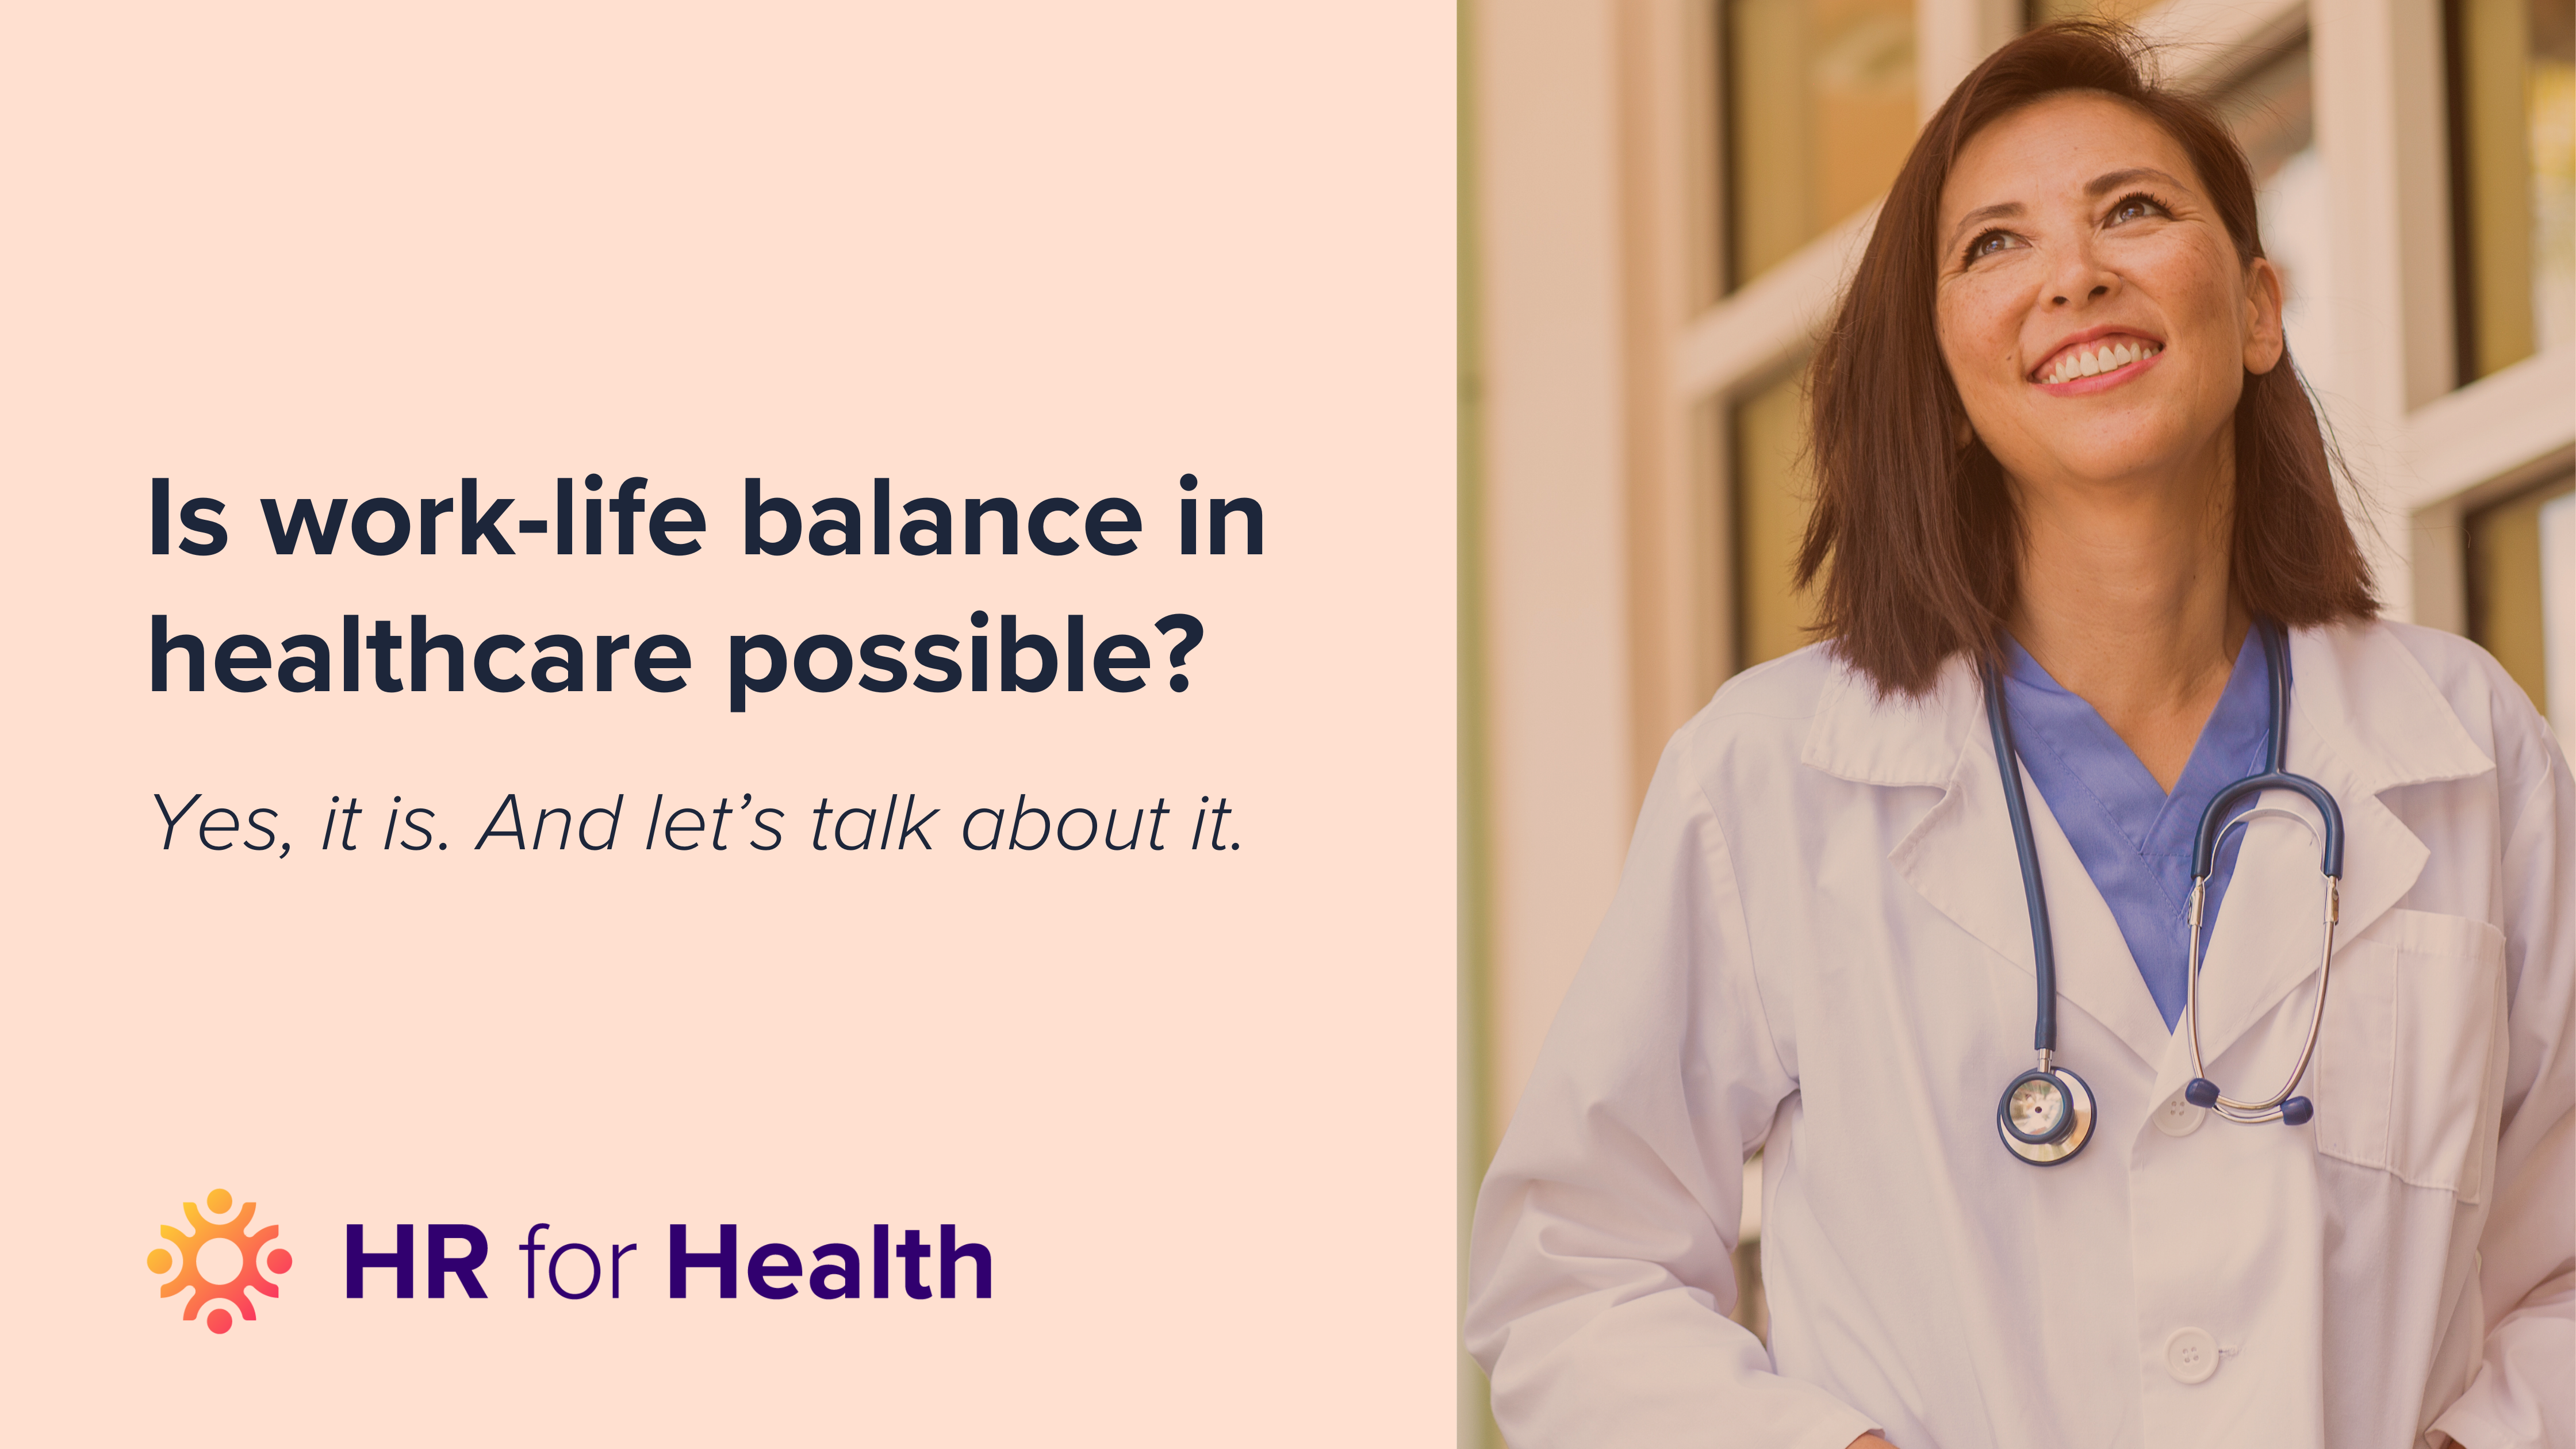 How to Create a Positive Work-Life Balance for Healthcare Workers